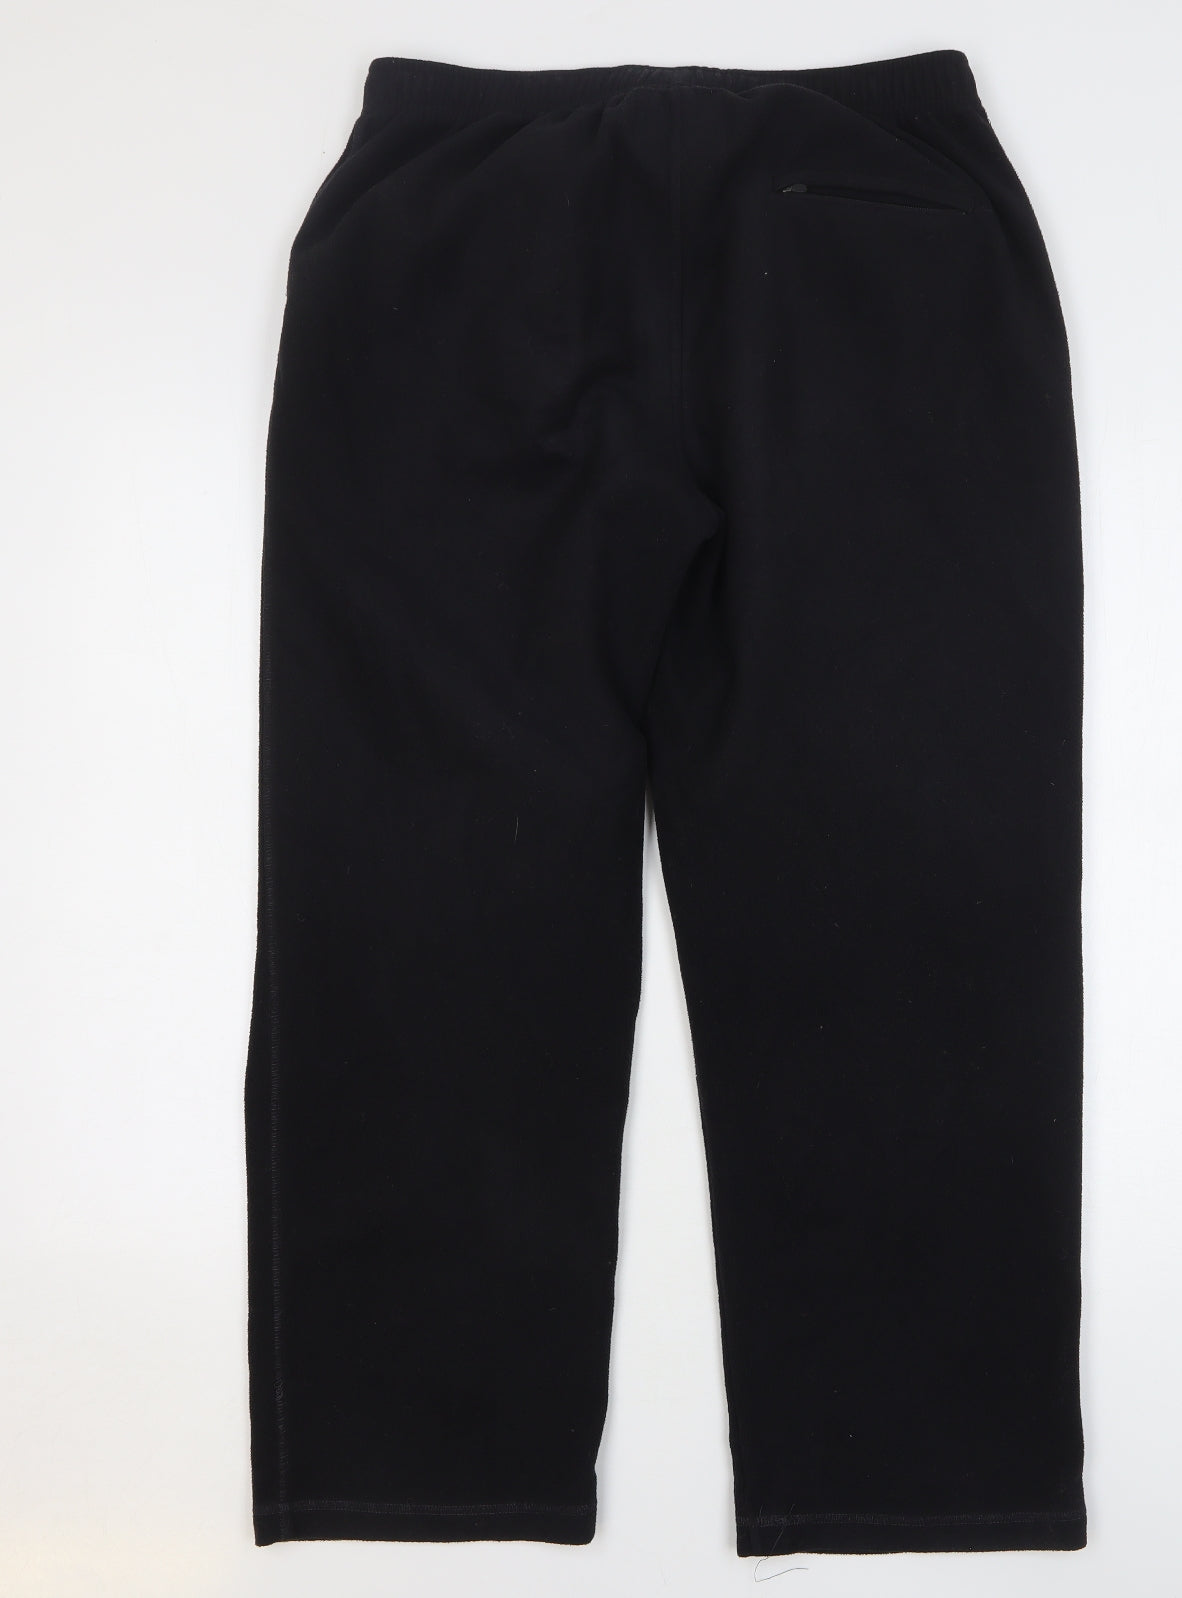 Blue Harbour Mens Black Polyester Sweatpants Trousers Size 36 L29 in Regular Drawstring